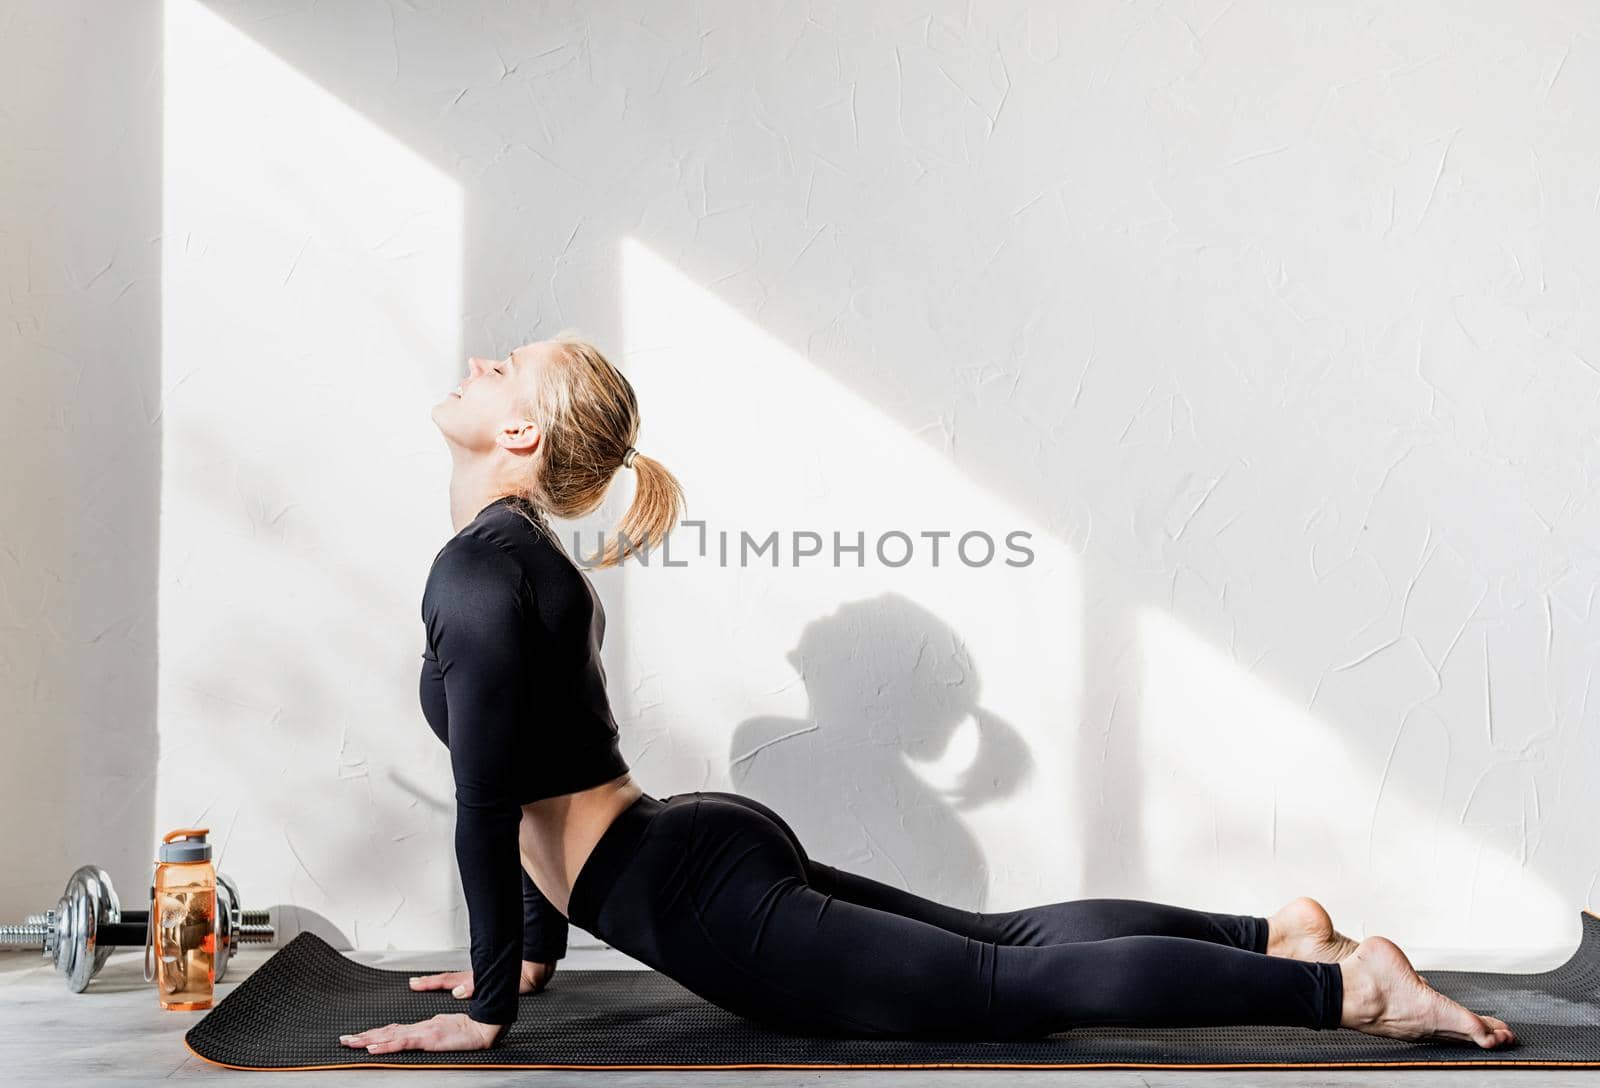 Healthy lifestyle. Sport and fitness. Young athletic woman working out or doing yoga stretching at home